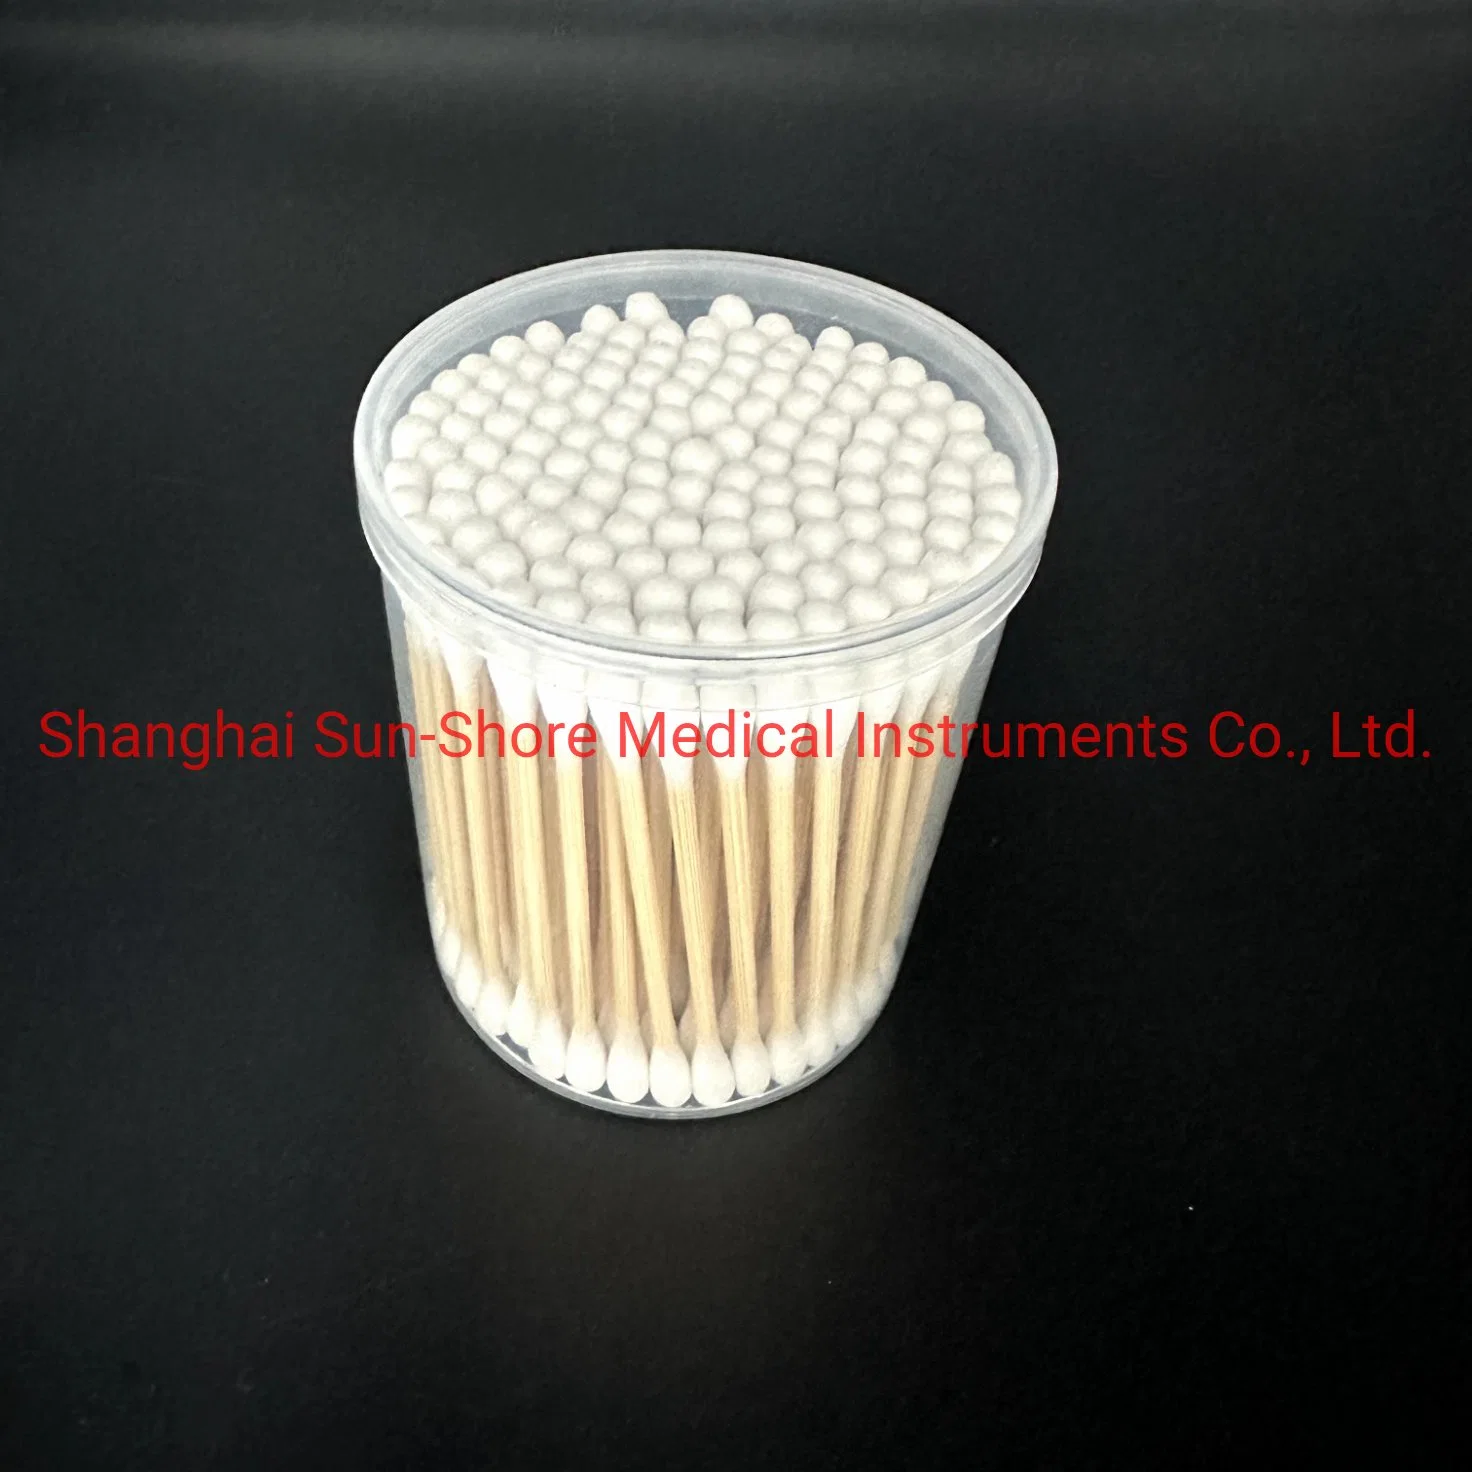 Factory Supply Cheap Price Cotton Swabs OEM Sterile Medical Cotton Swab Stick with Single Head